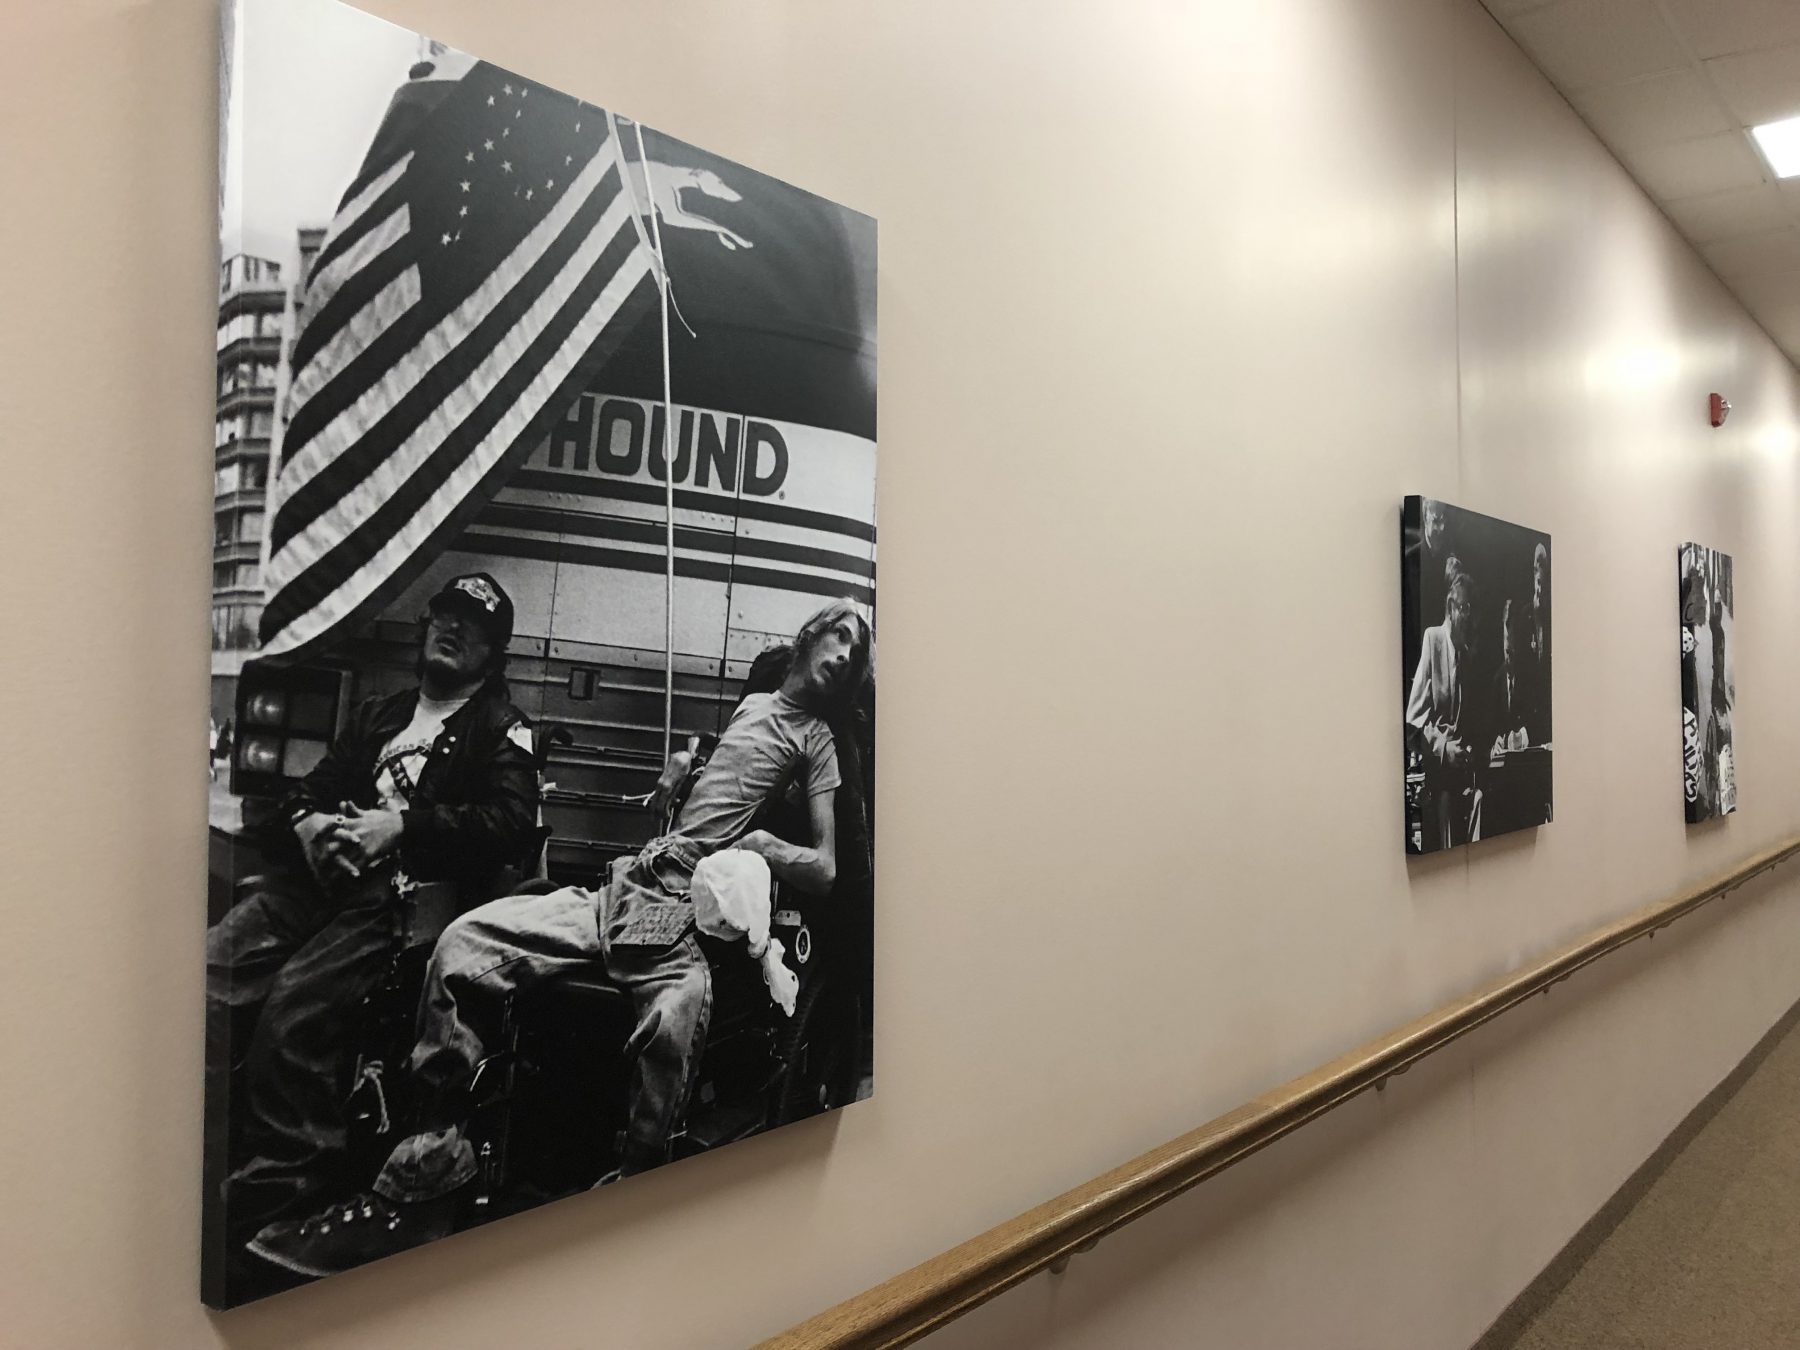 Office hallway with hand railing and Tom Olin's black and white photos hung on the wall